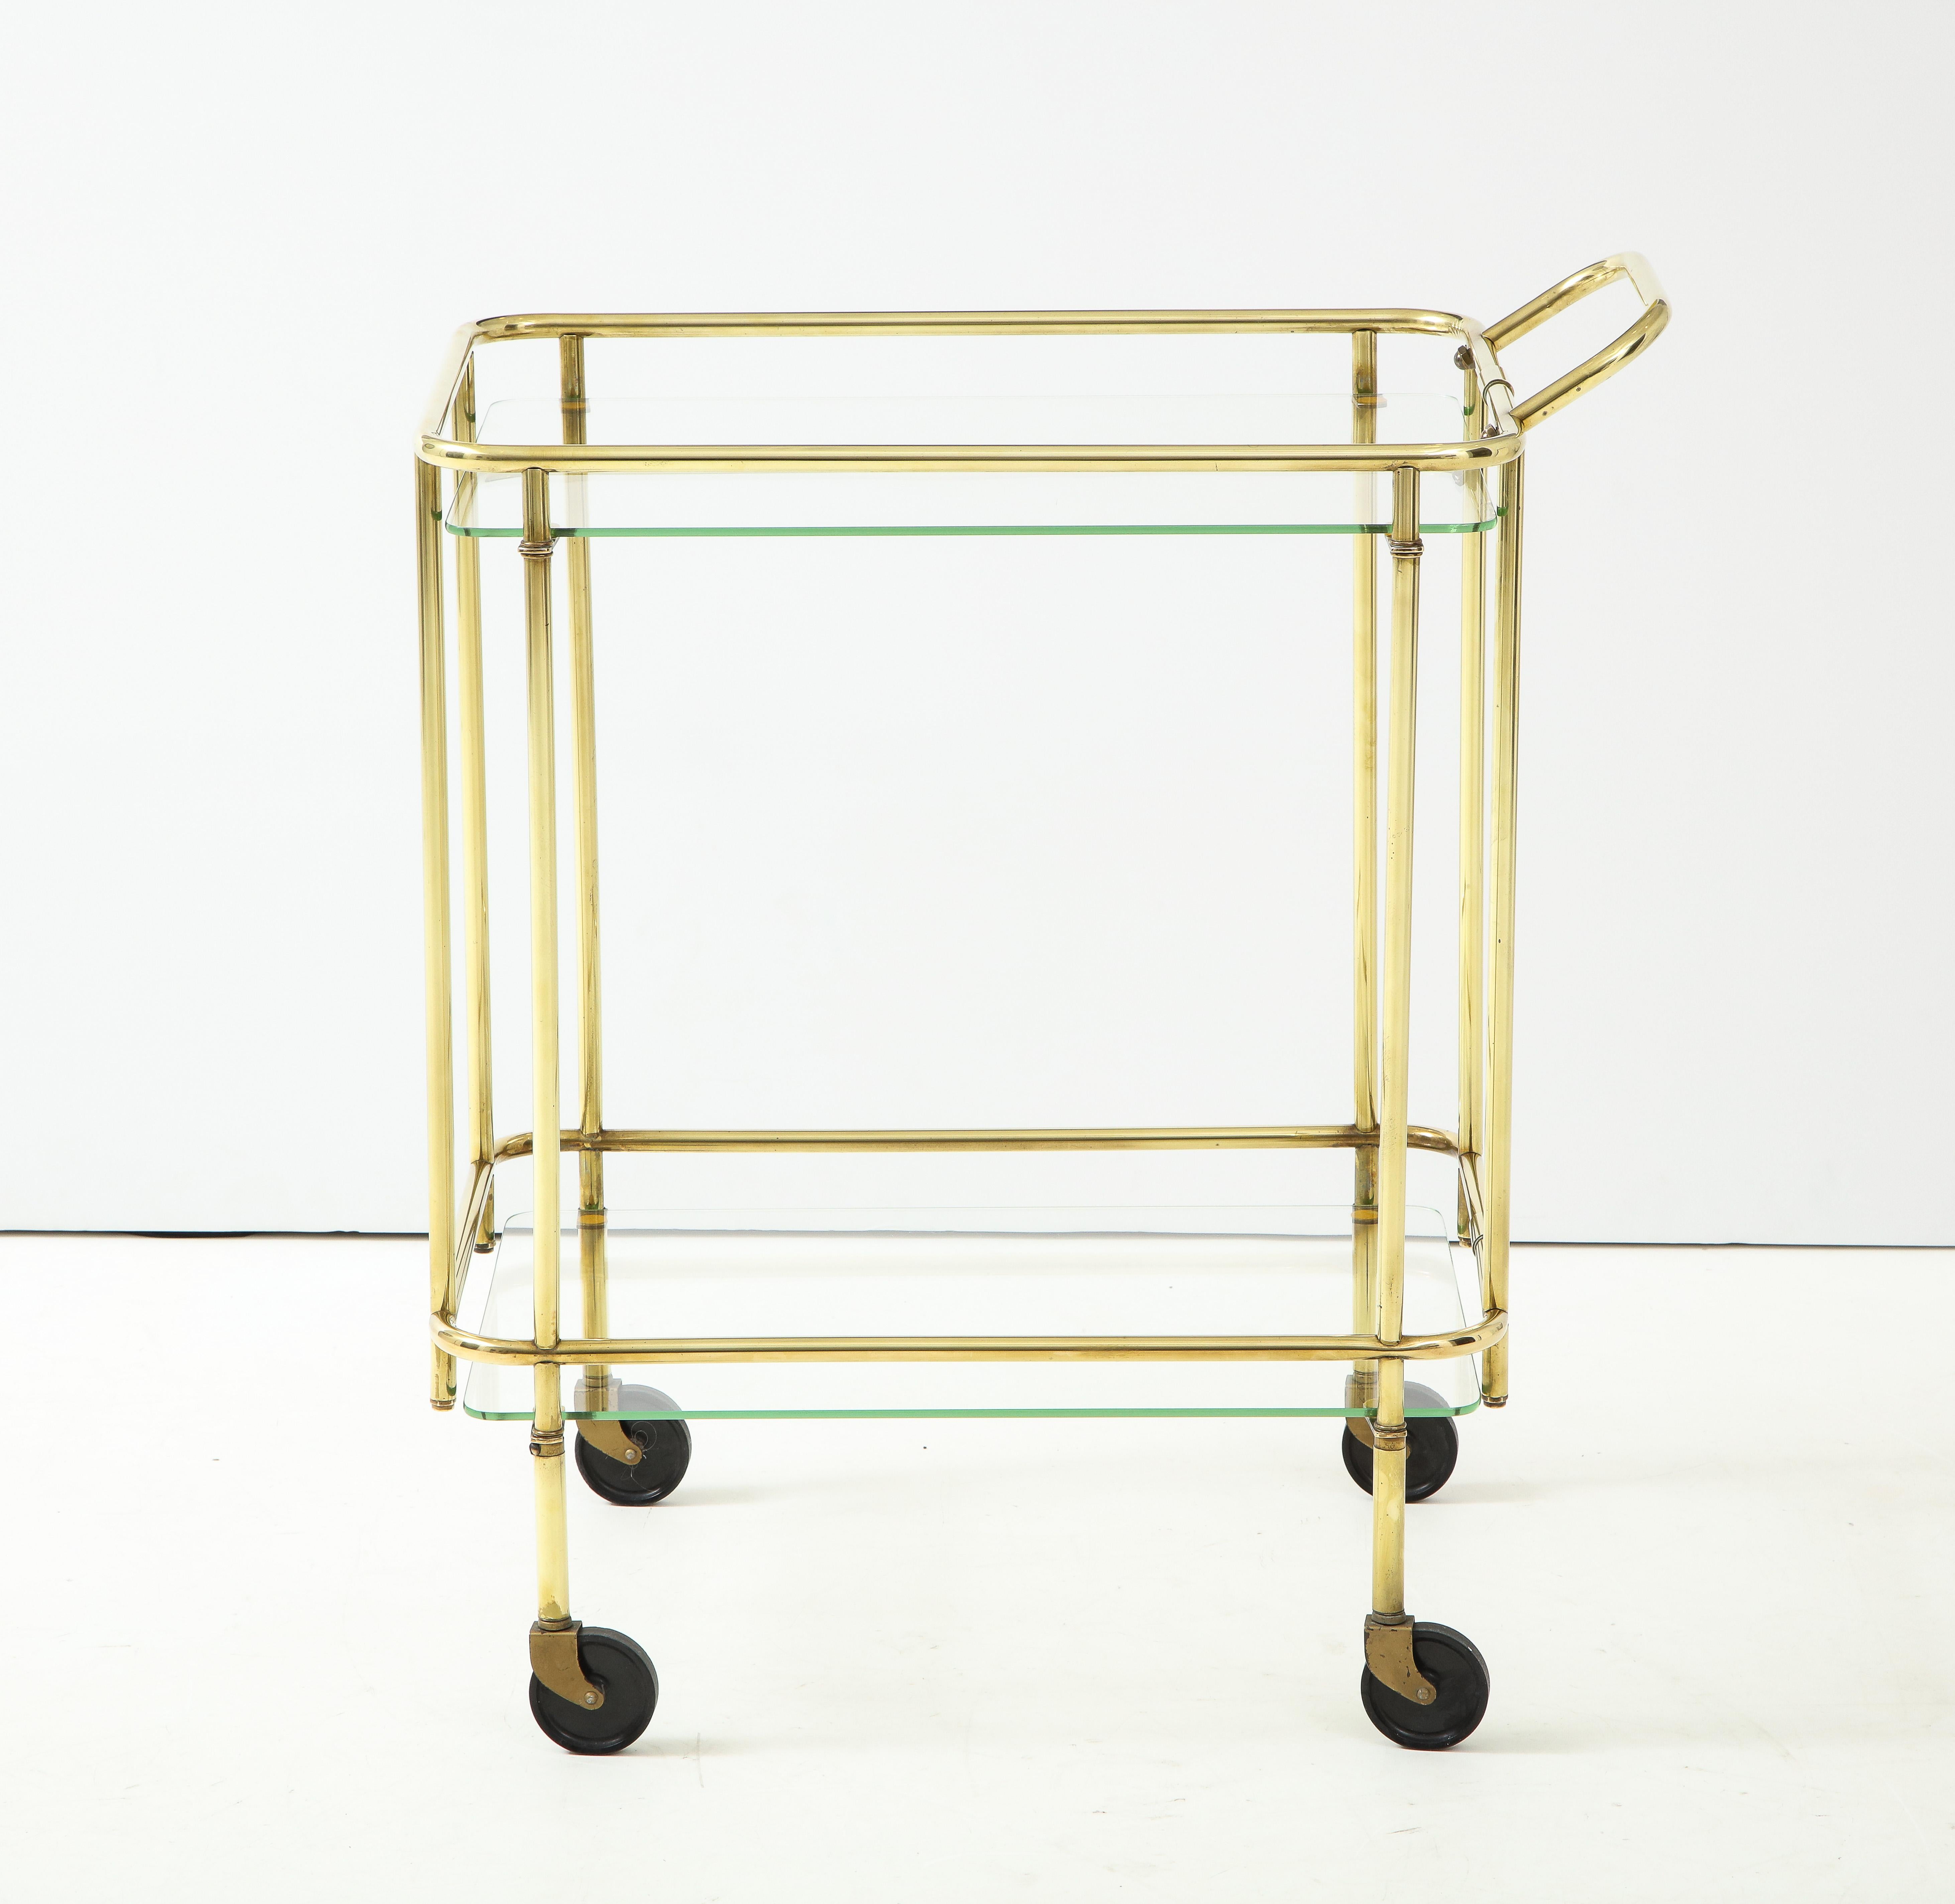 Stunning 1950's Mid-Century Modern solid brass two tier Italian bar cart, in vintage condition with some wear and patina to the brass and light scratches to the glass, lightly hand polished.